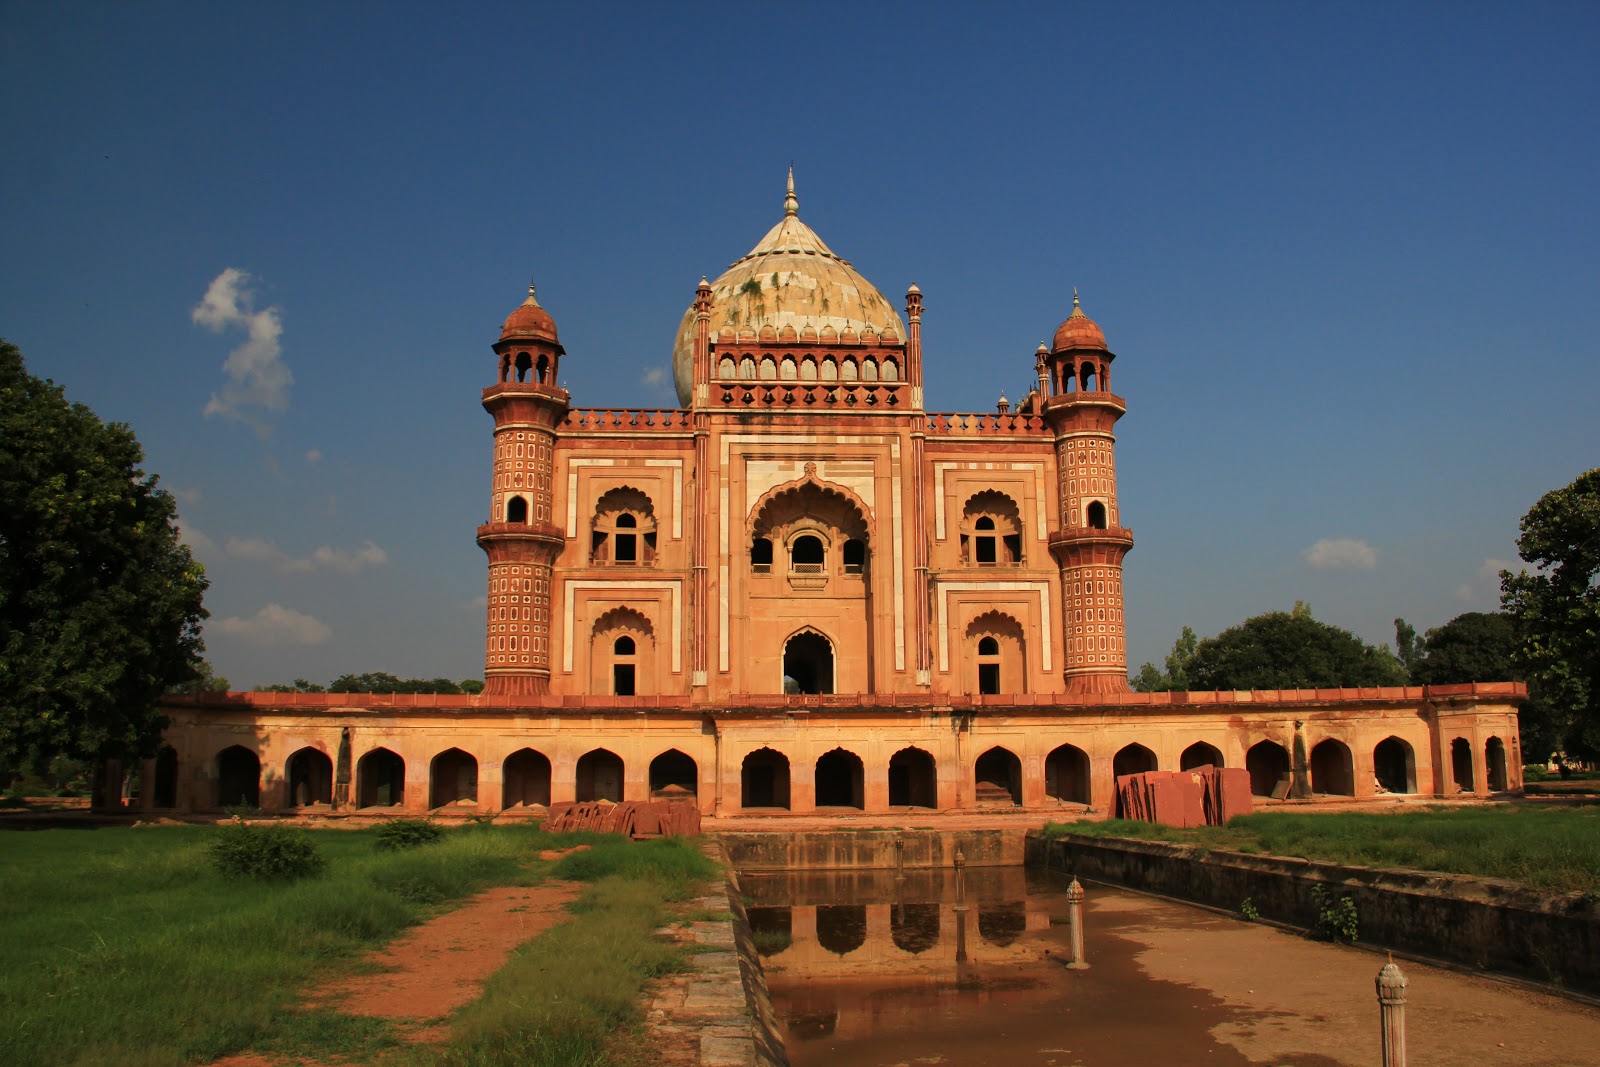 Old Monuments are Delhi's pride and Glory - India Travel Blog